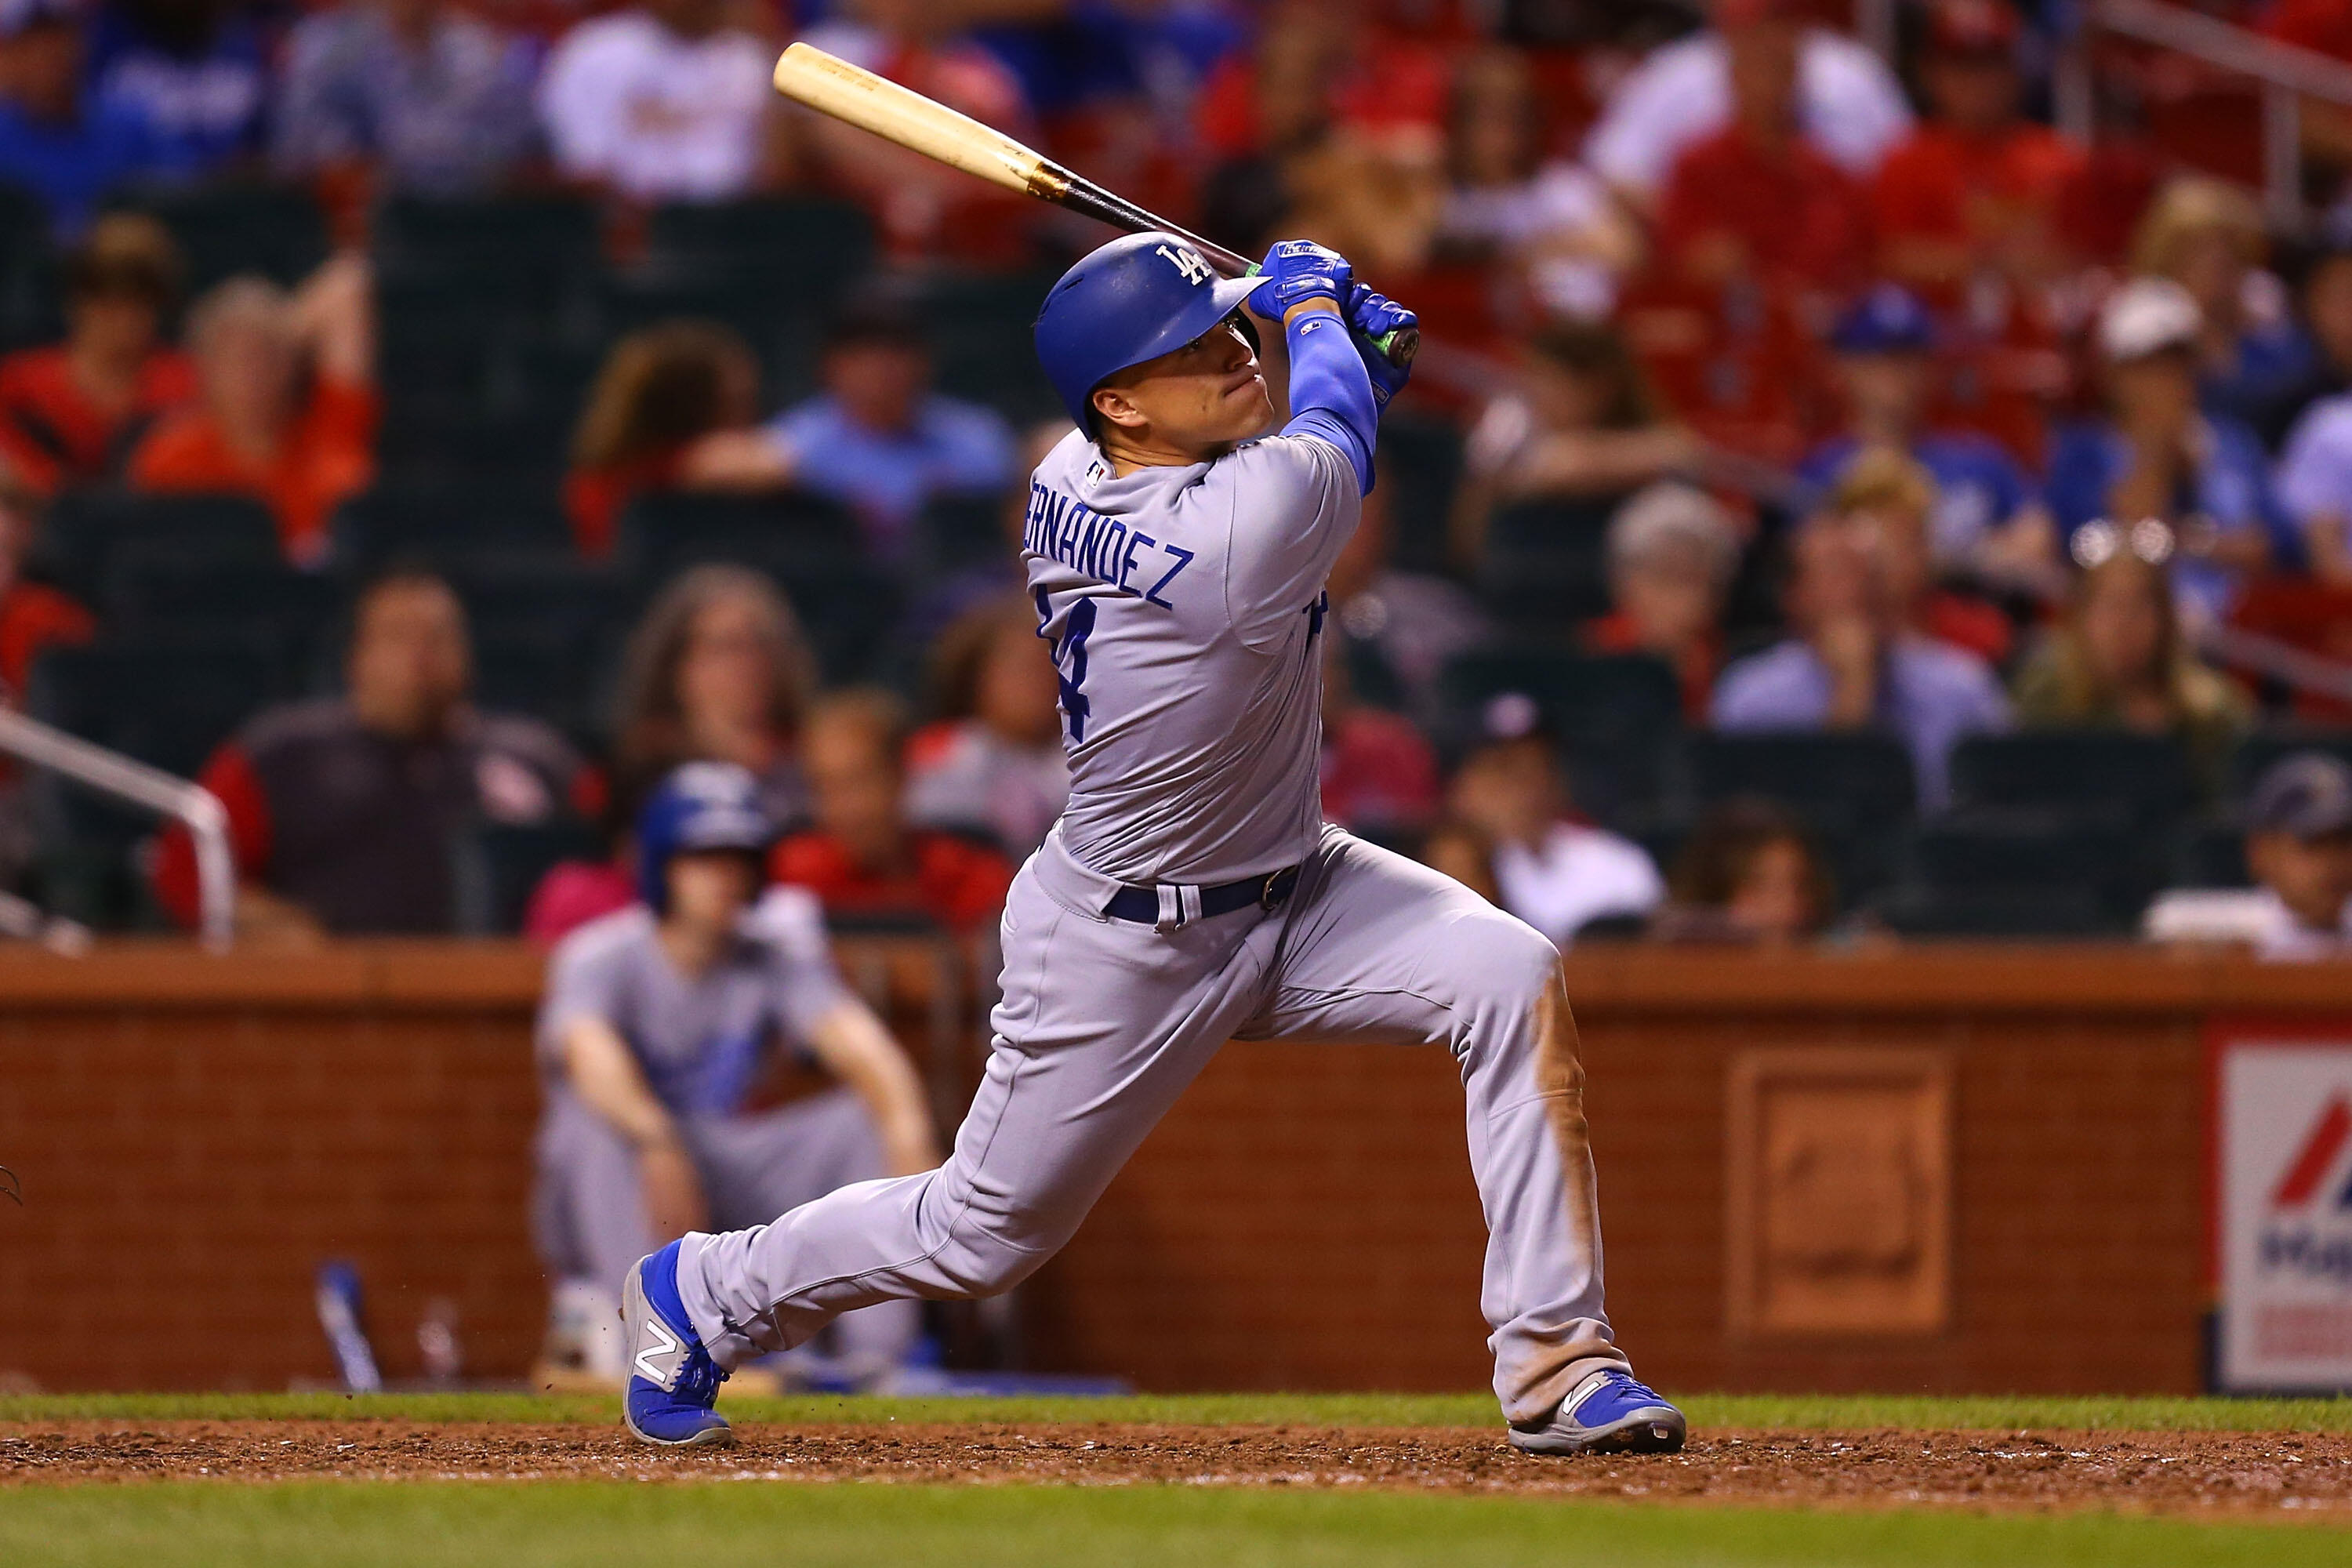 ST. LOUIS, MO - MAY 30: Enrique Hernandez #14 of the Los Angeles Dodgers hits a sacrifice RBI against the St. Louis Cardinals in the ninth inning at Busch Stadium on May 30, 2017 in St. Louis, Missouri.  (Photo by Dilip Vishwanat/Getty Images)